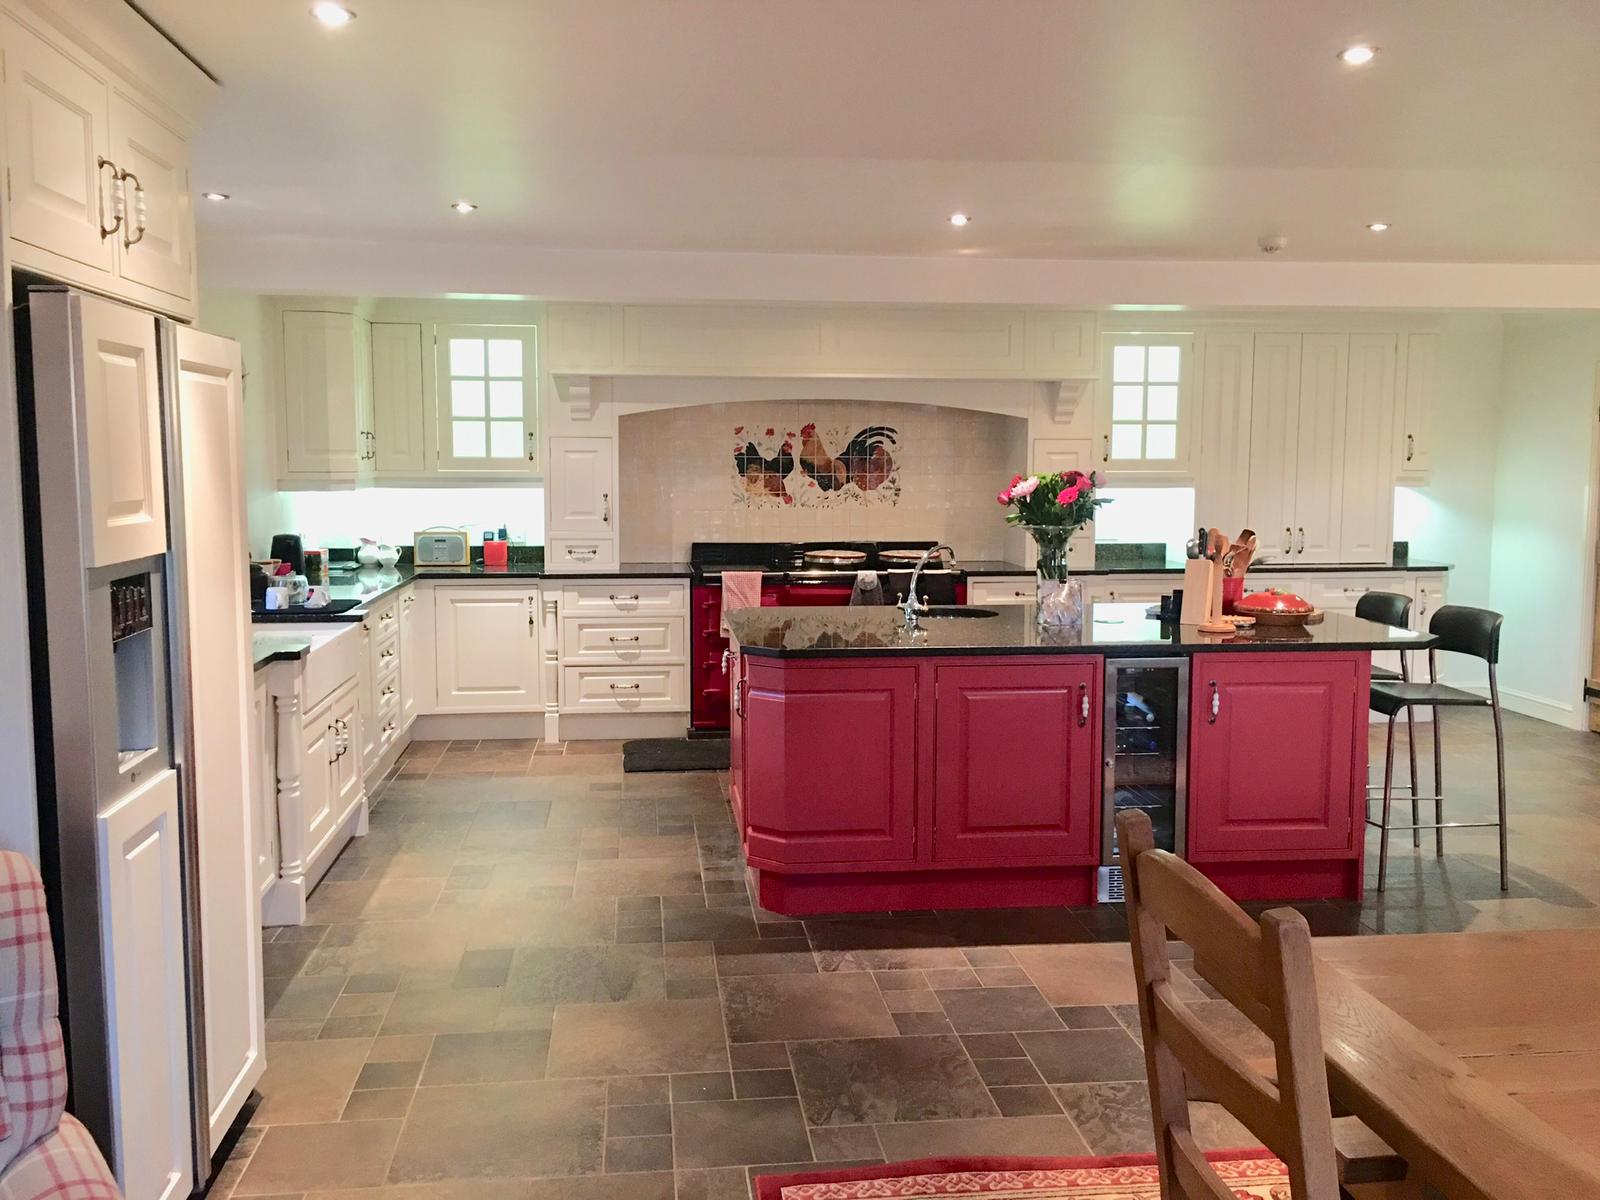 Large bespoke kitchen hand painted in Farrow and Ball pointing on the main cabinets and Farrow and Ball Radicchio Red on the island